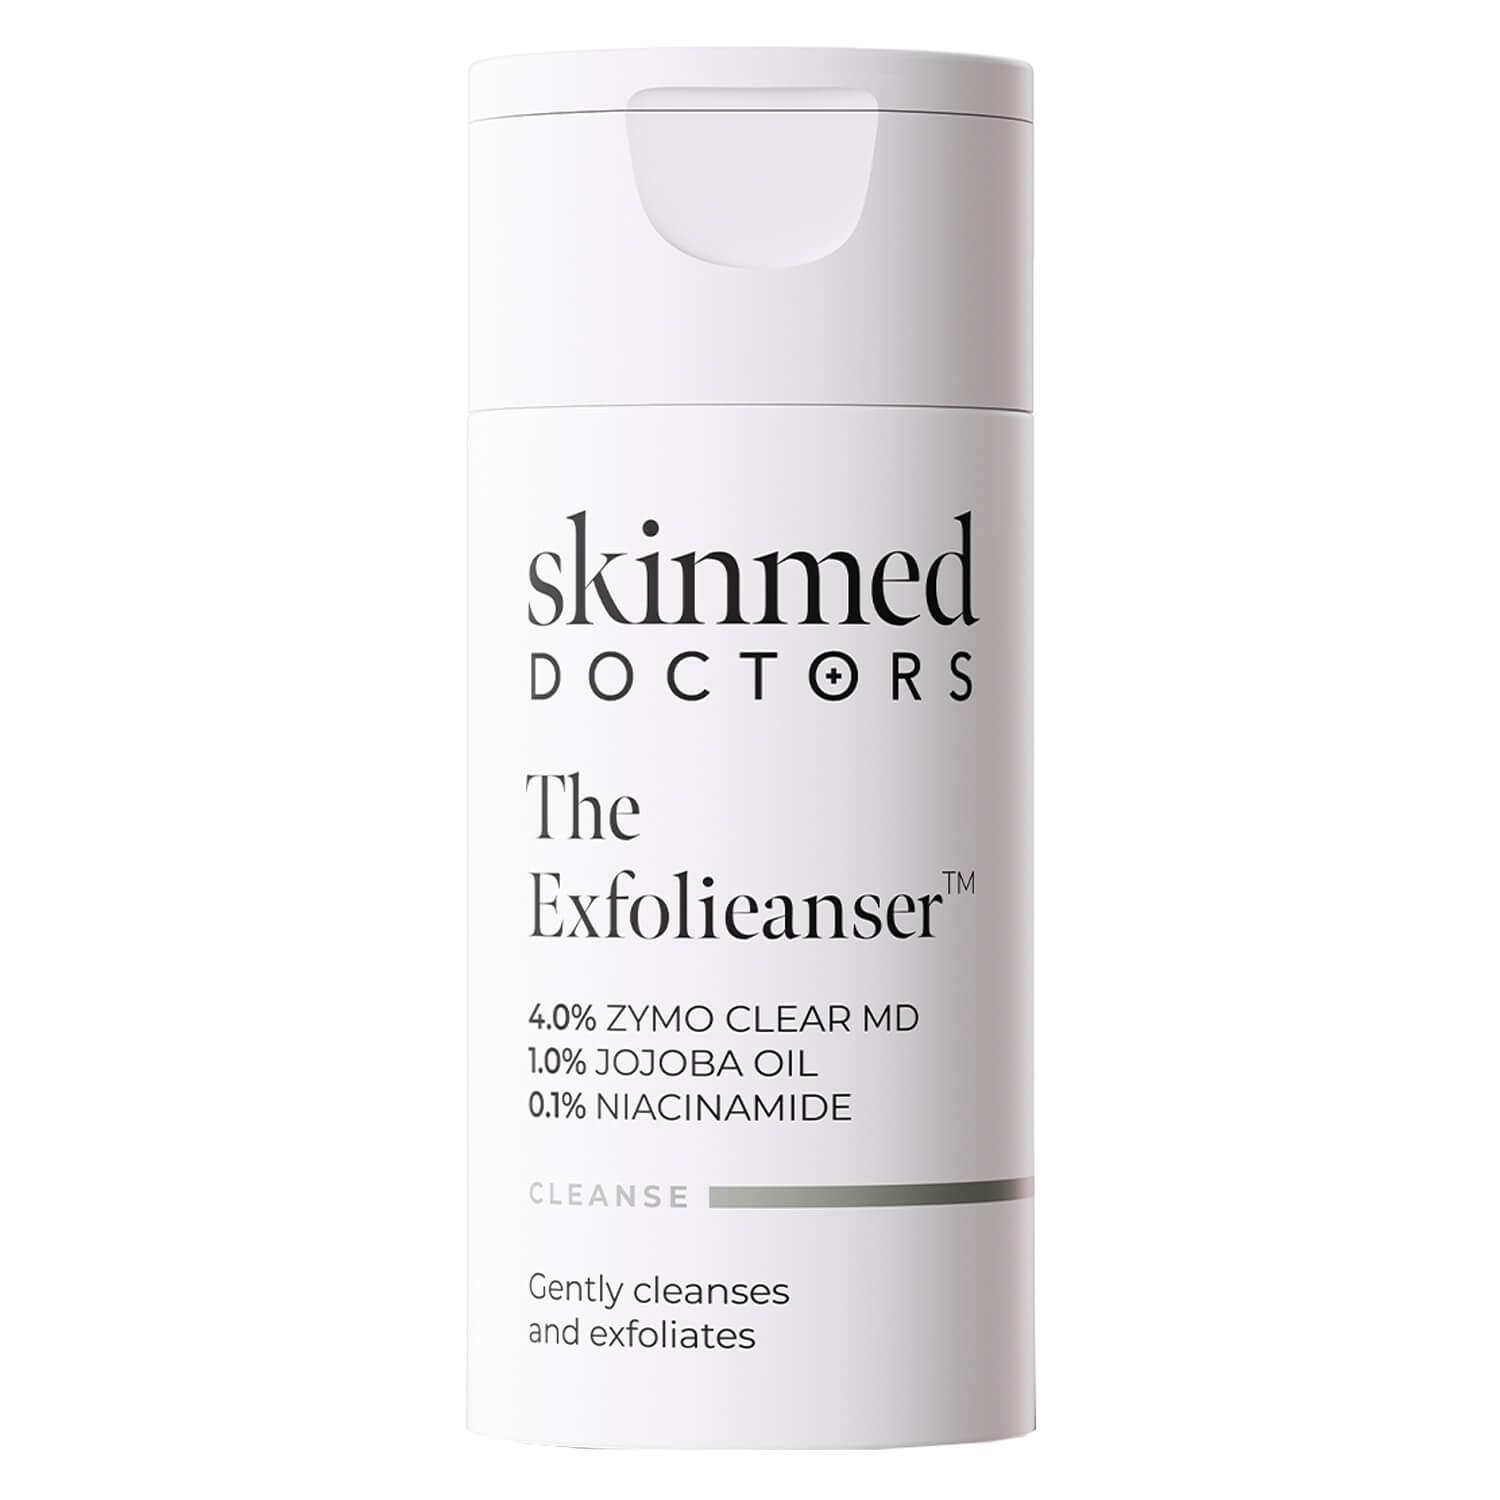 skinmed Doctors - The Exfolieanser